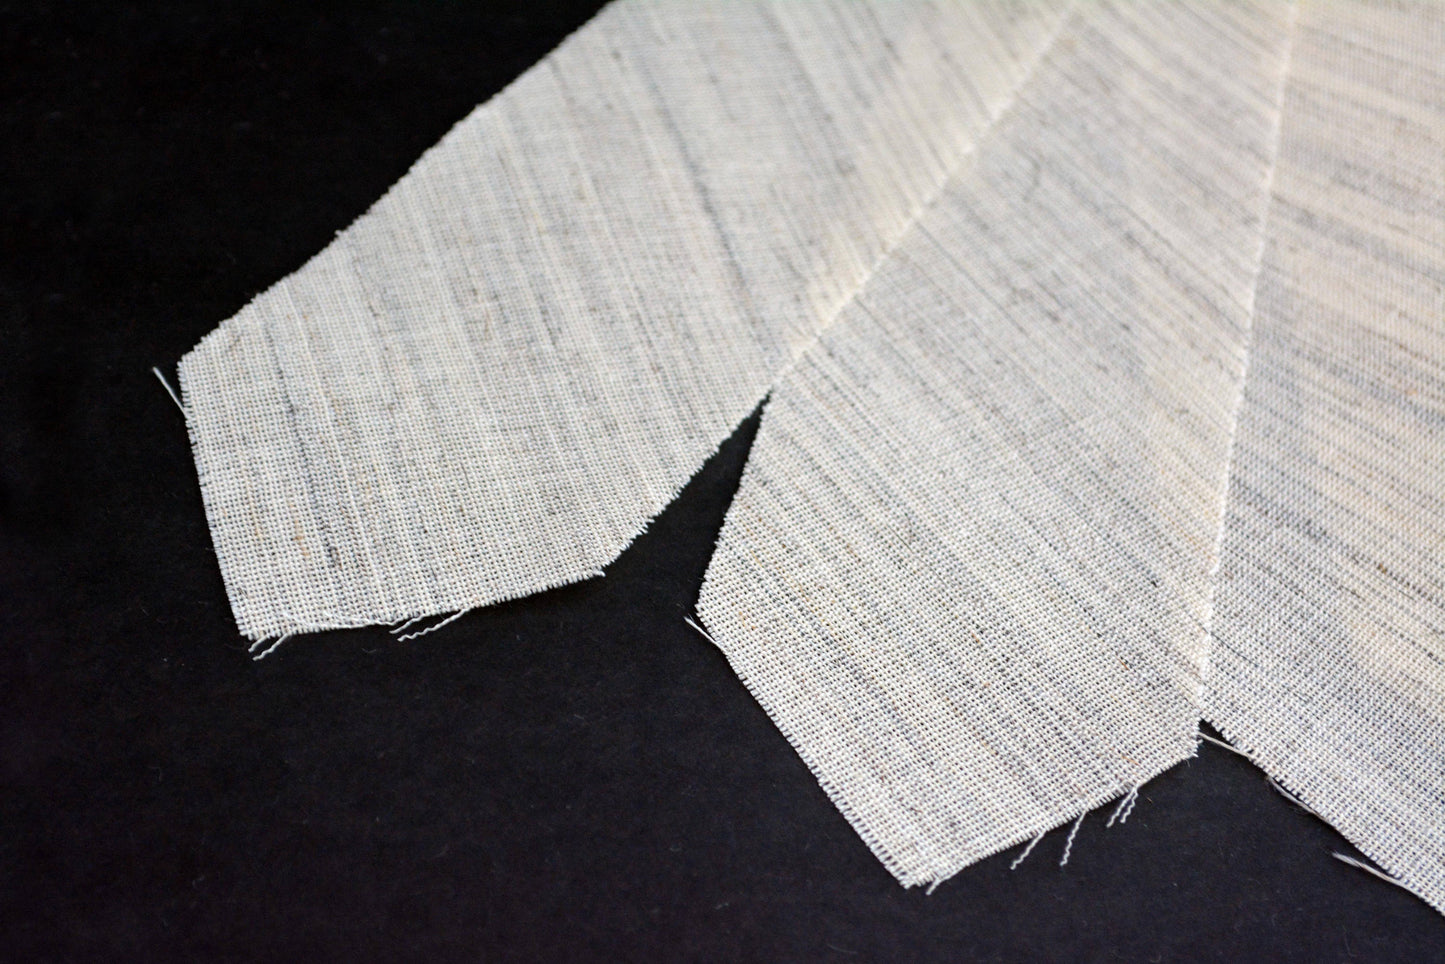 PRE-CUT 3 1/2" wide Wool + Goat Hair necktie interfacing / interlining - AC Ter Kuile, finest available, Made Netherlands